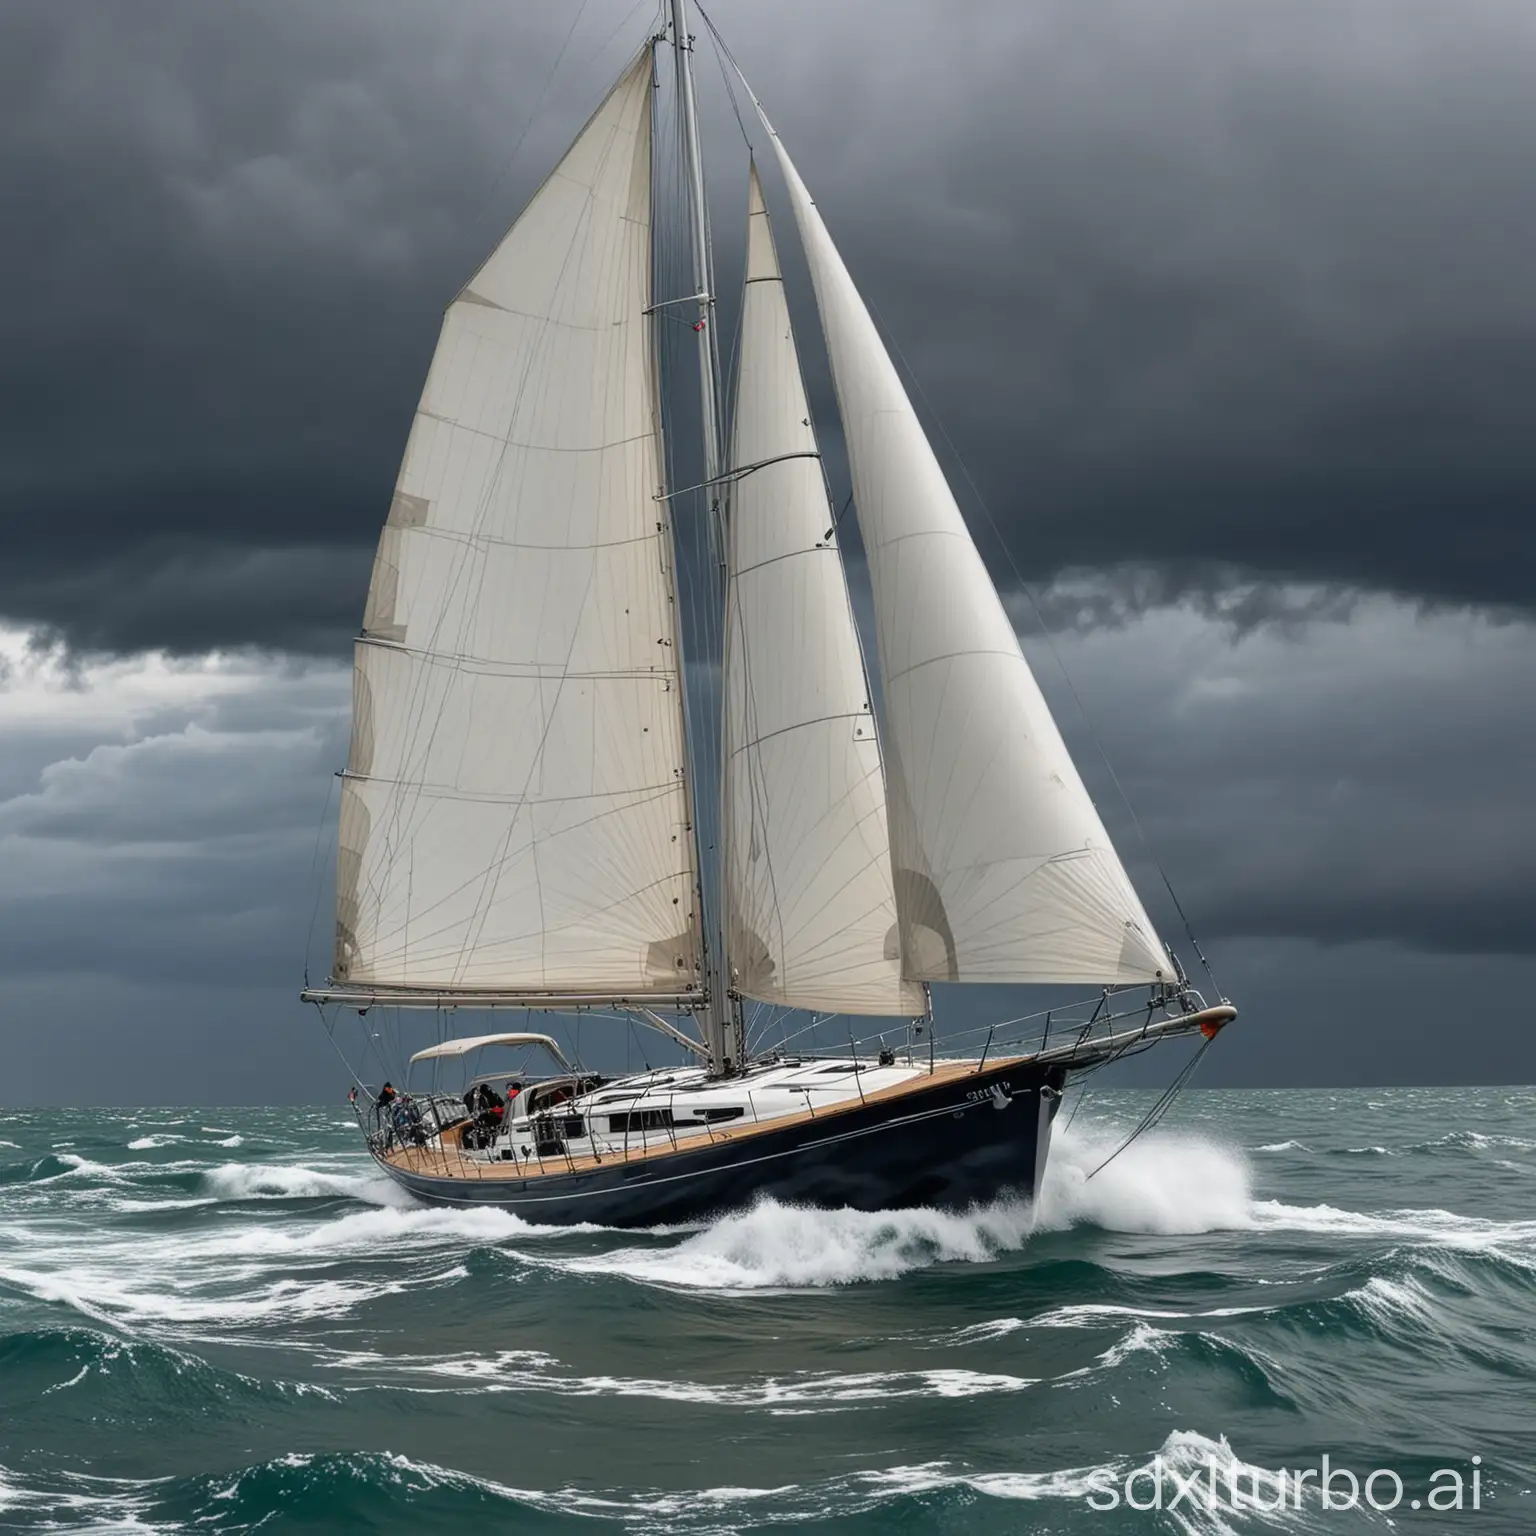 54 foot sailing yacht in the storm